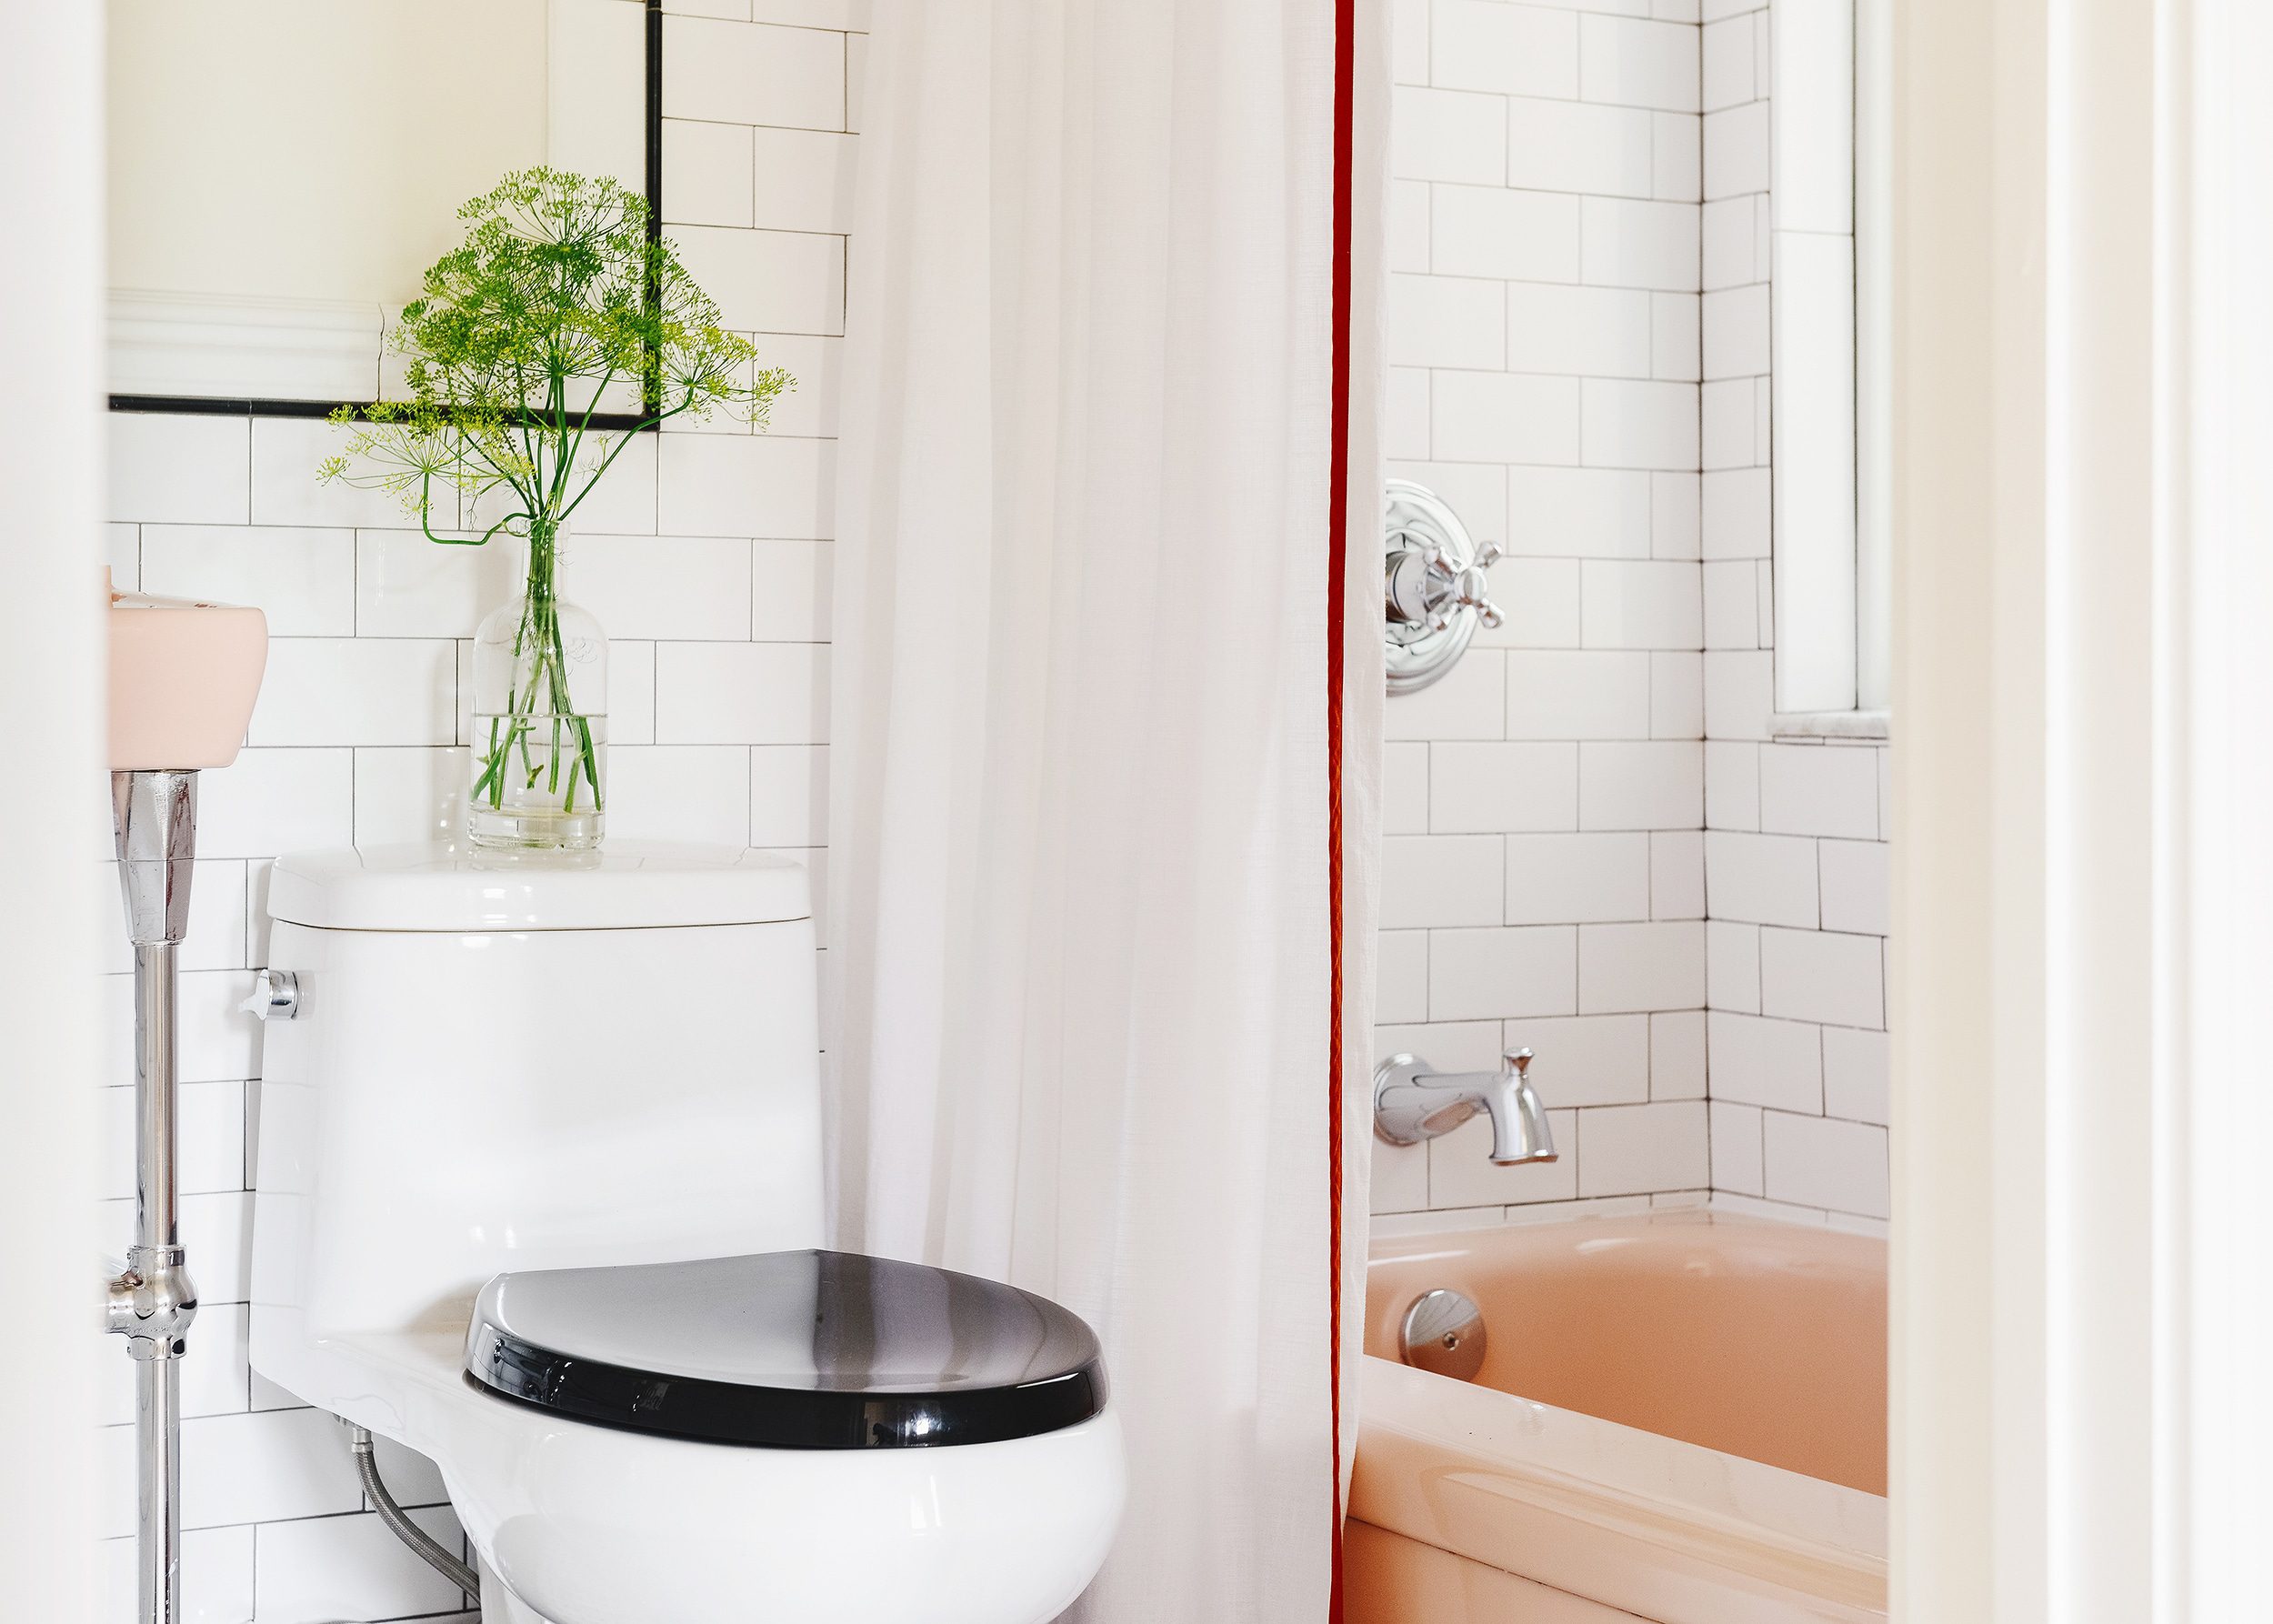 A small white bathroom with classic subway tile and a vintage pink bathtub | via Yellow Brick Home